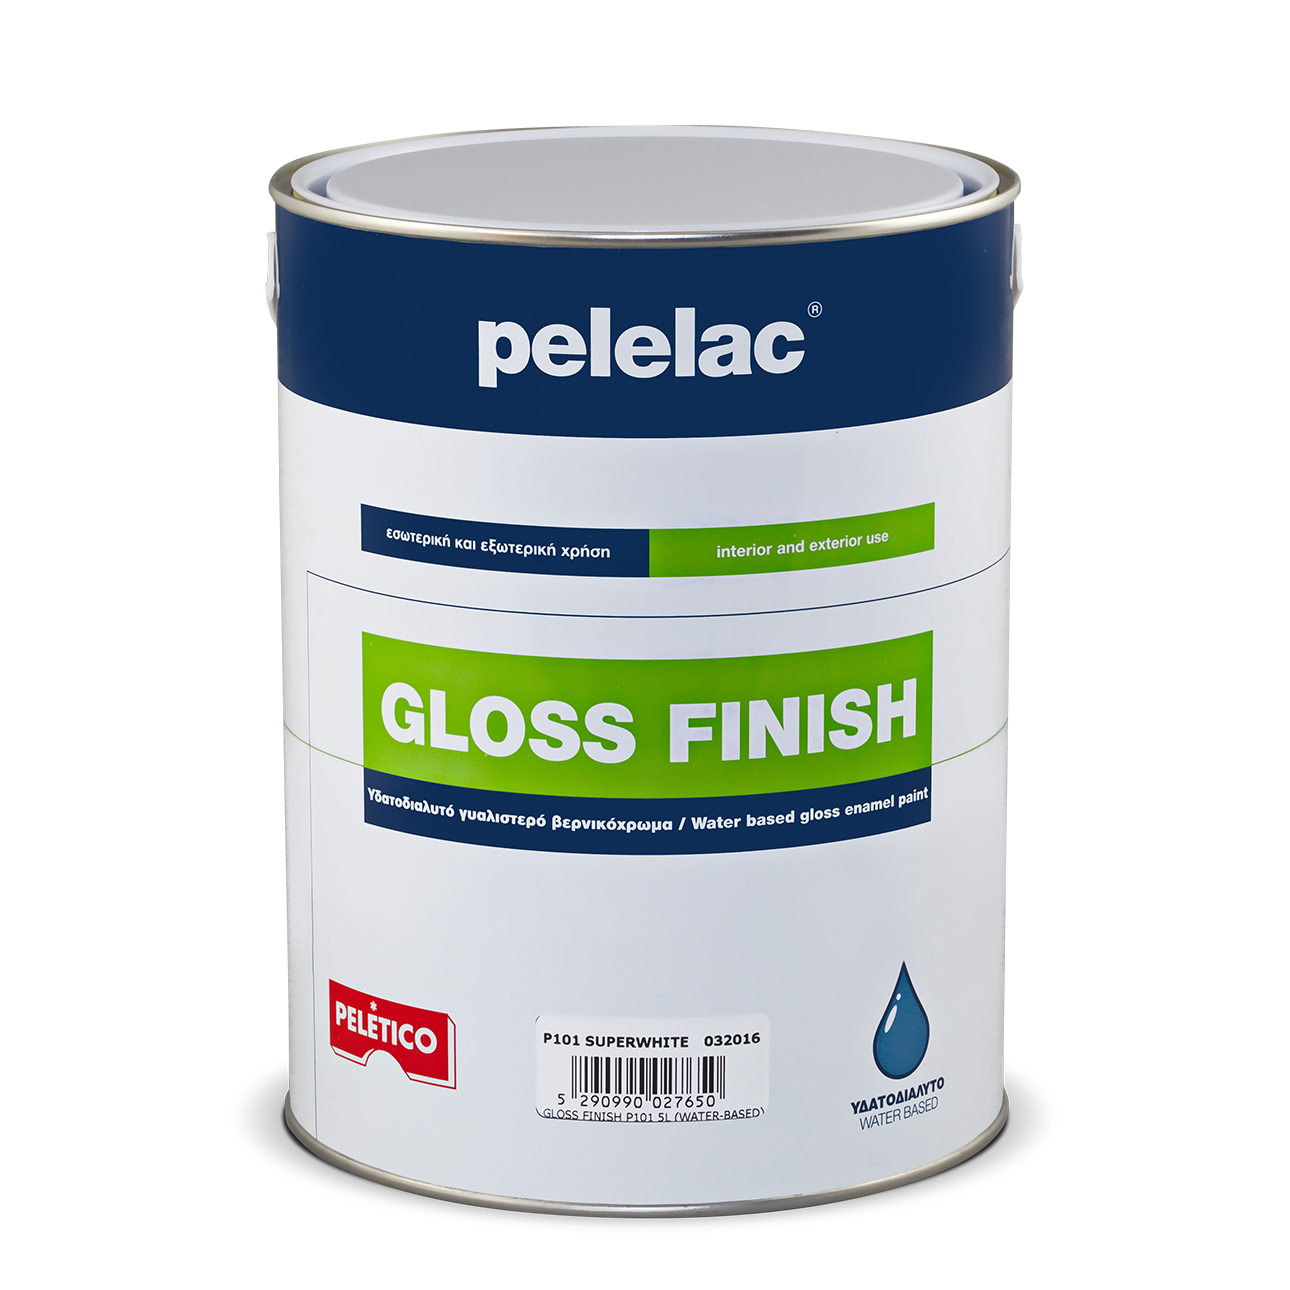 PELELAC® GLOSS FINISH PEWTER P129 0.75L WATER BASED